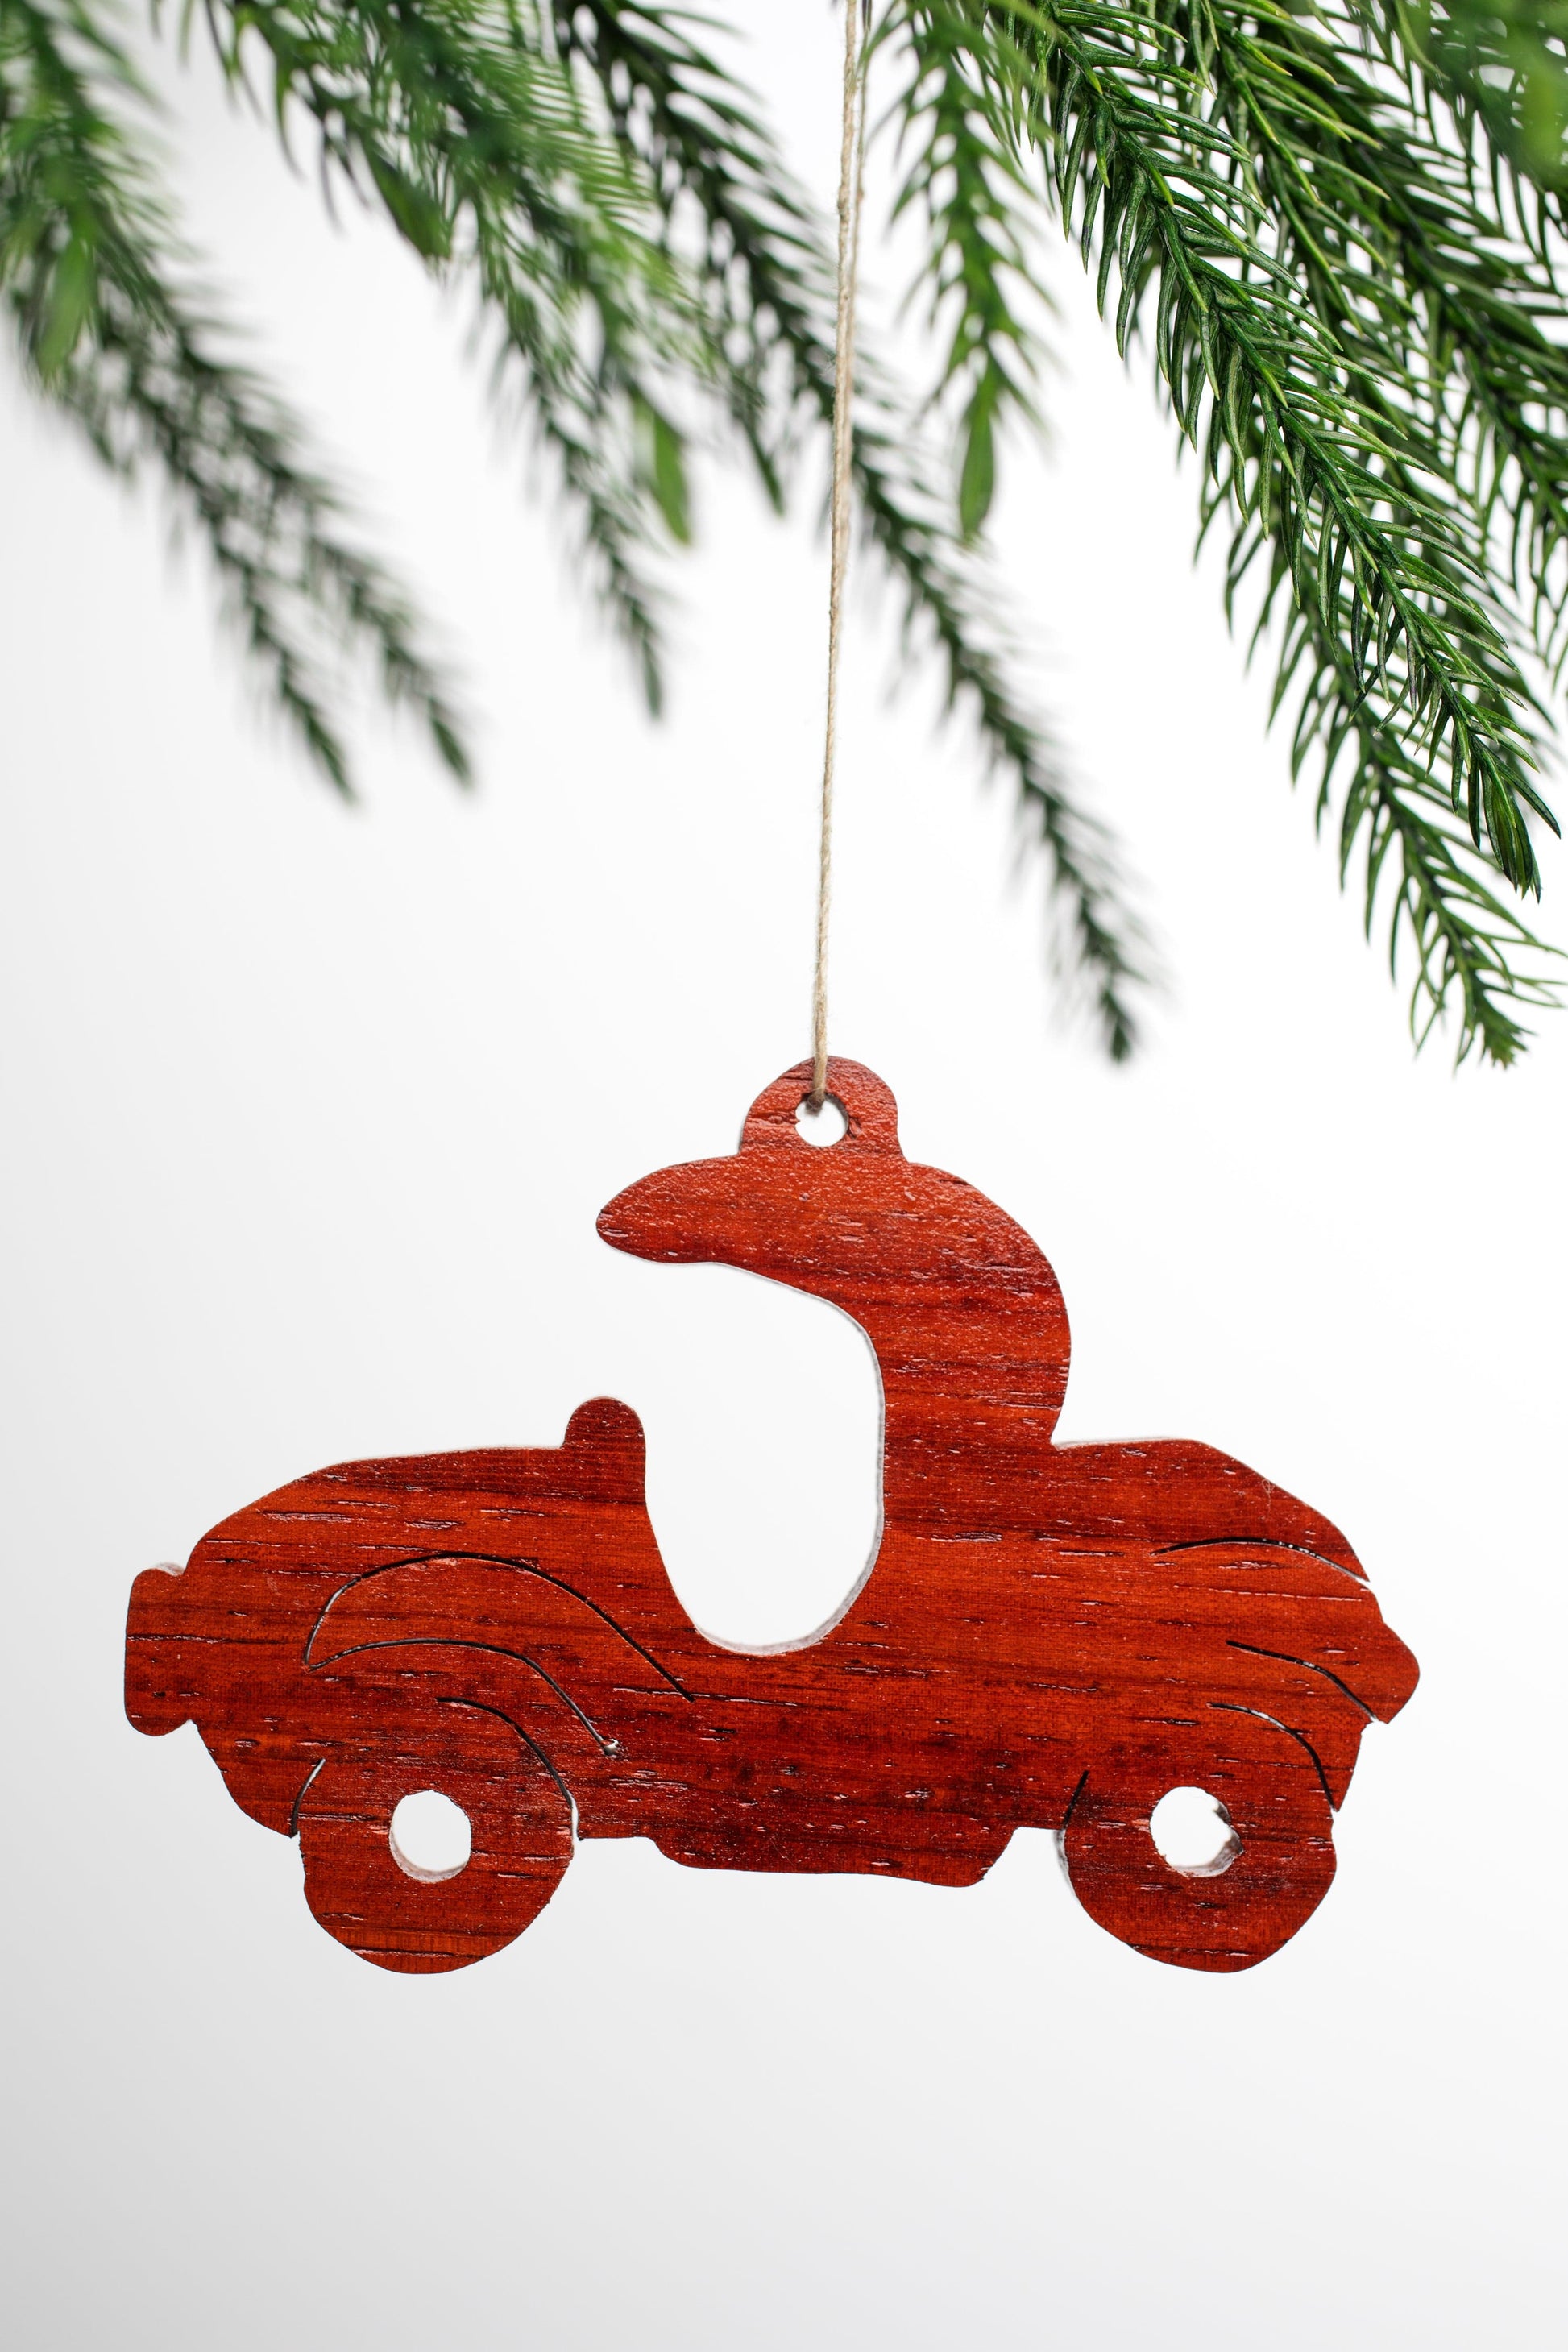 The Carpentry Shop Co. Solid Wood Handmade Holiday Ornaments